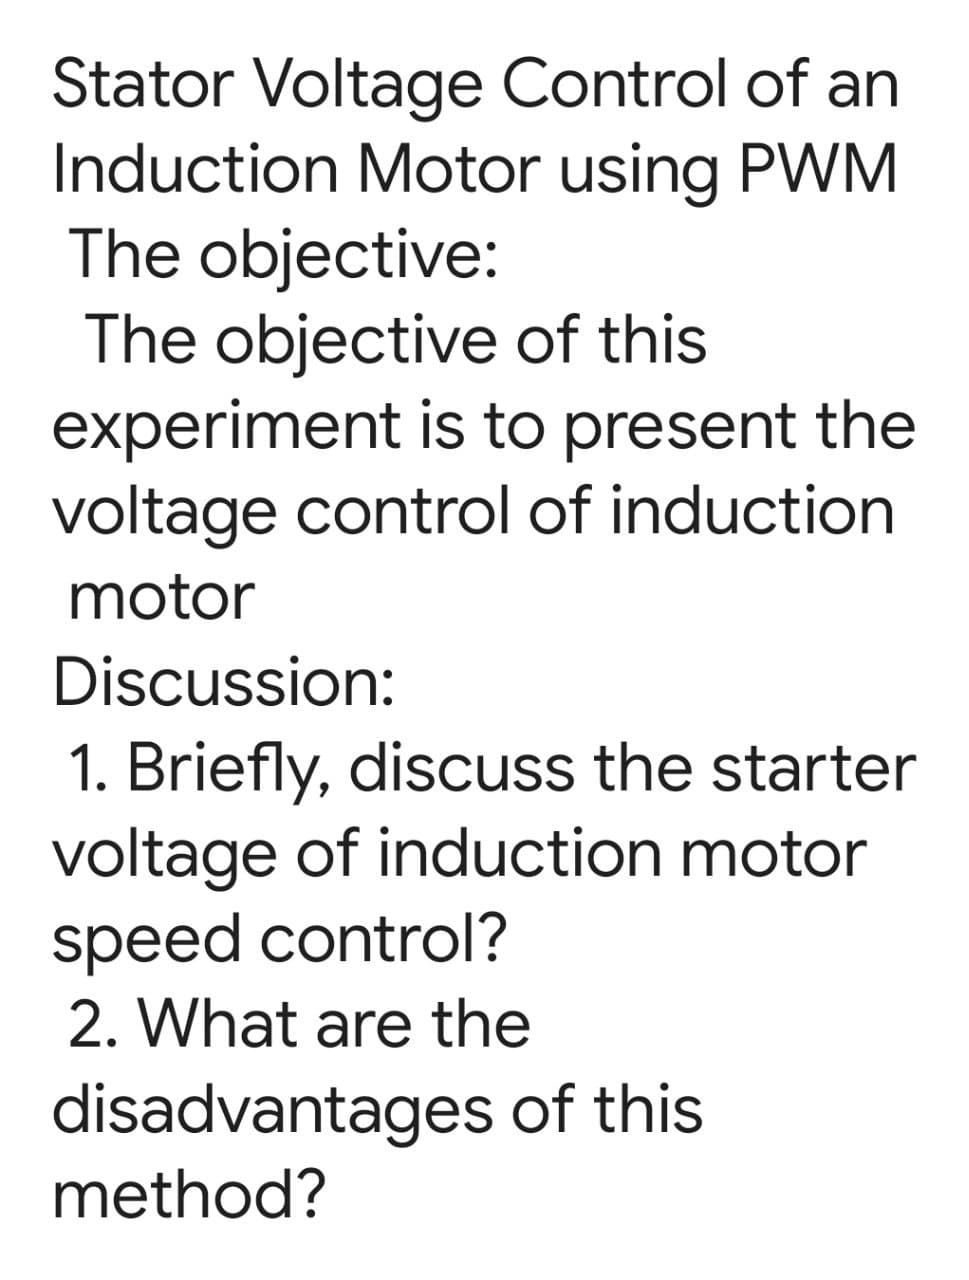 Stator Voltage Control of an
Induction Motor using PWM
The objective:
The objective of this
experiment is to present the
voltage control of induction
motor
Discussion:
1. Briefly, discuss the starter
voltage of induction motor
speed control?
2. What are the
disadvantages of this
method?
